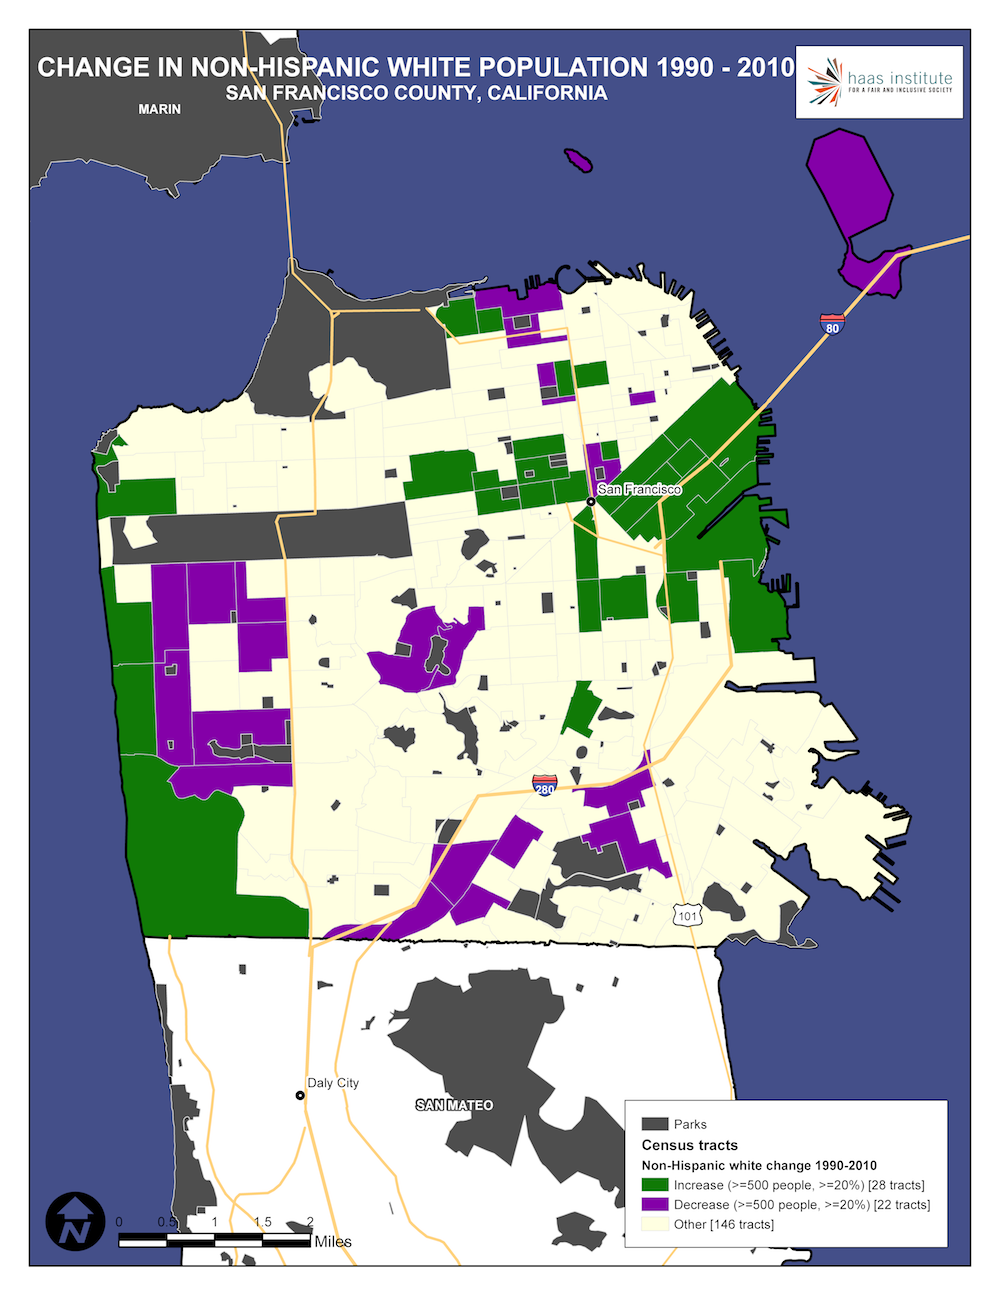 Map shows change in SF county white population from 1990 to 2010